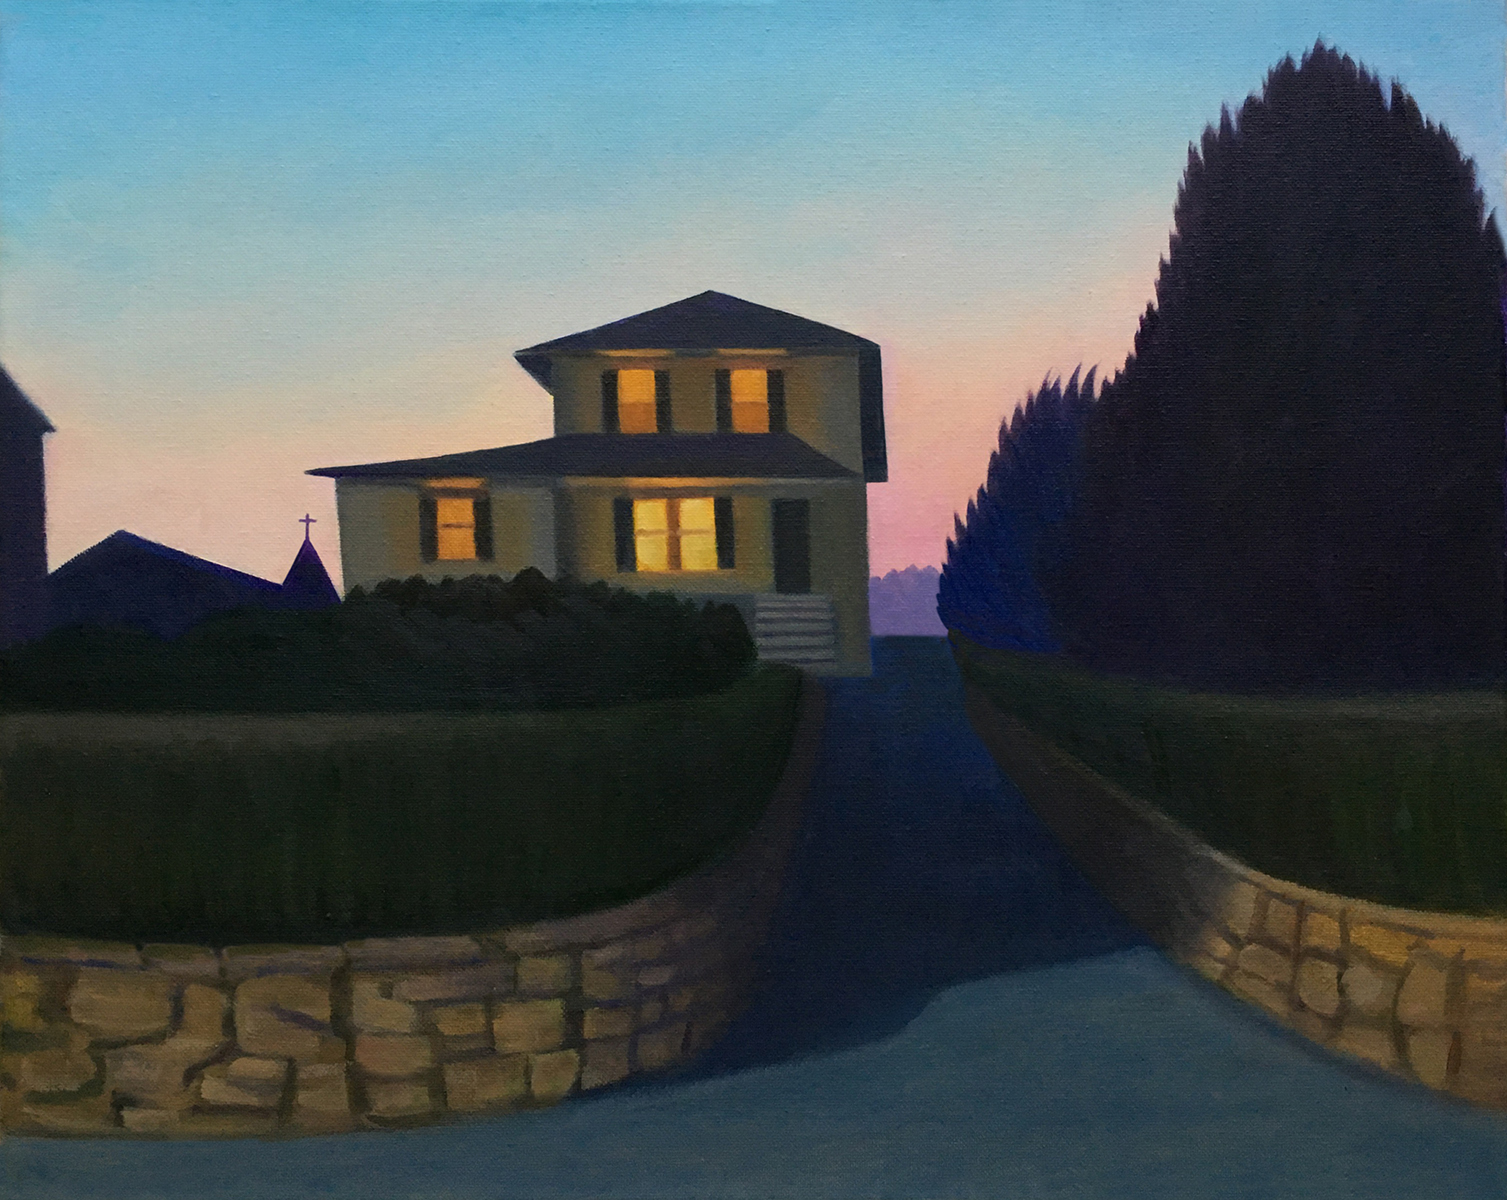 Twilight by David Davenport 16X20 oil on canvas at Craven Allen Gallery1400